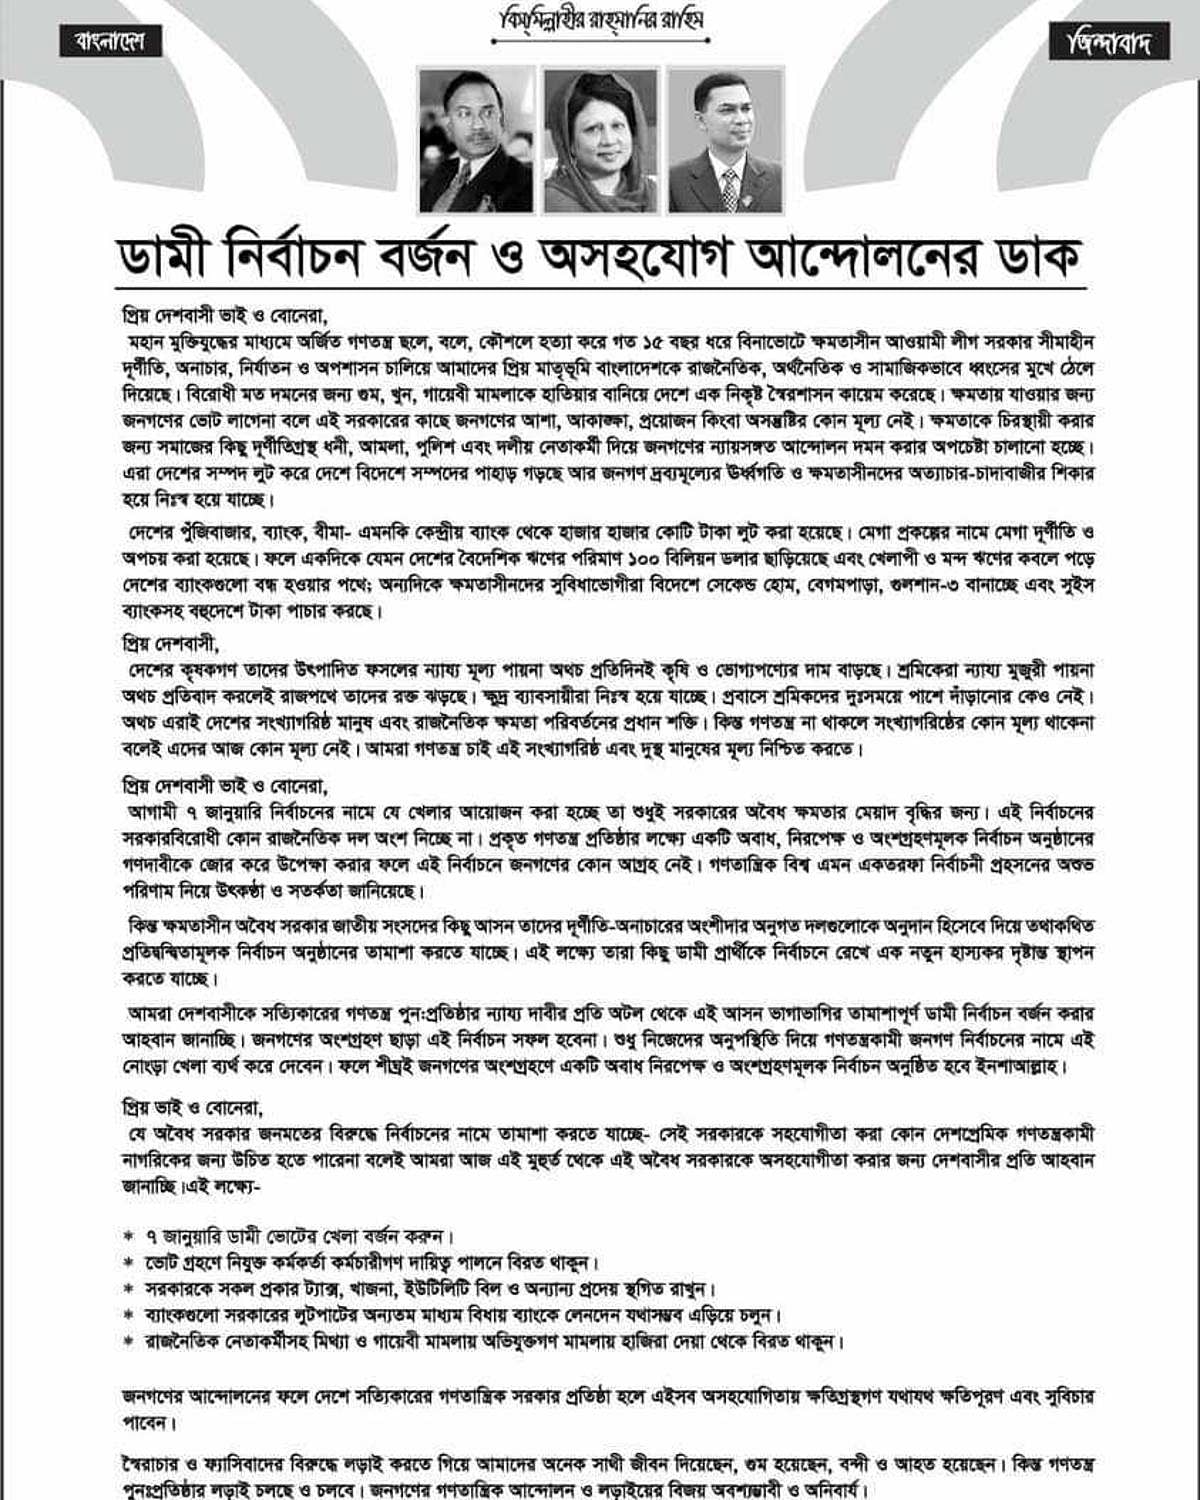 One of the leaflets distributed by BNP.